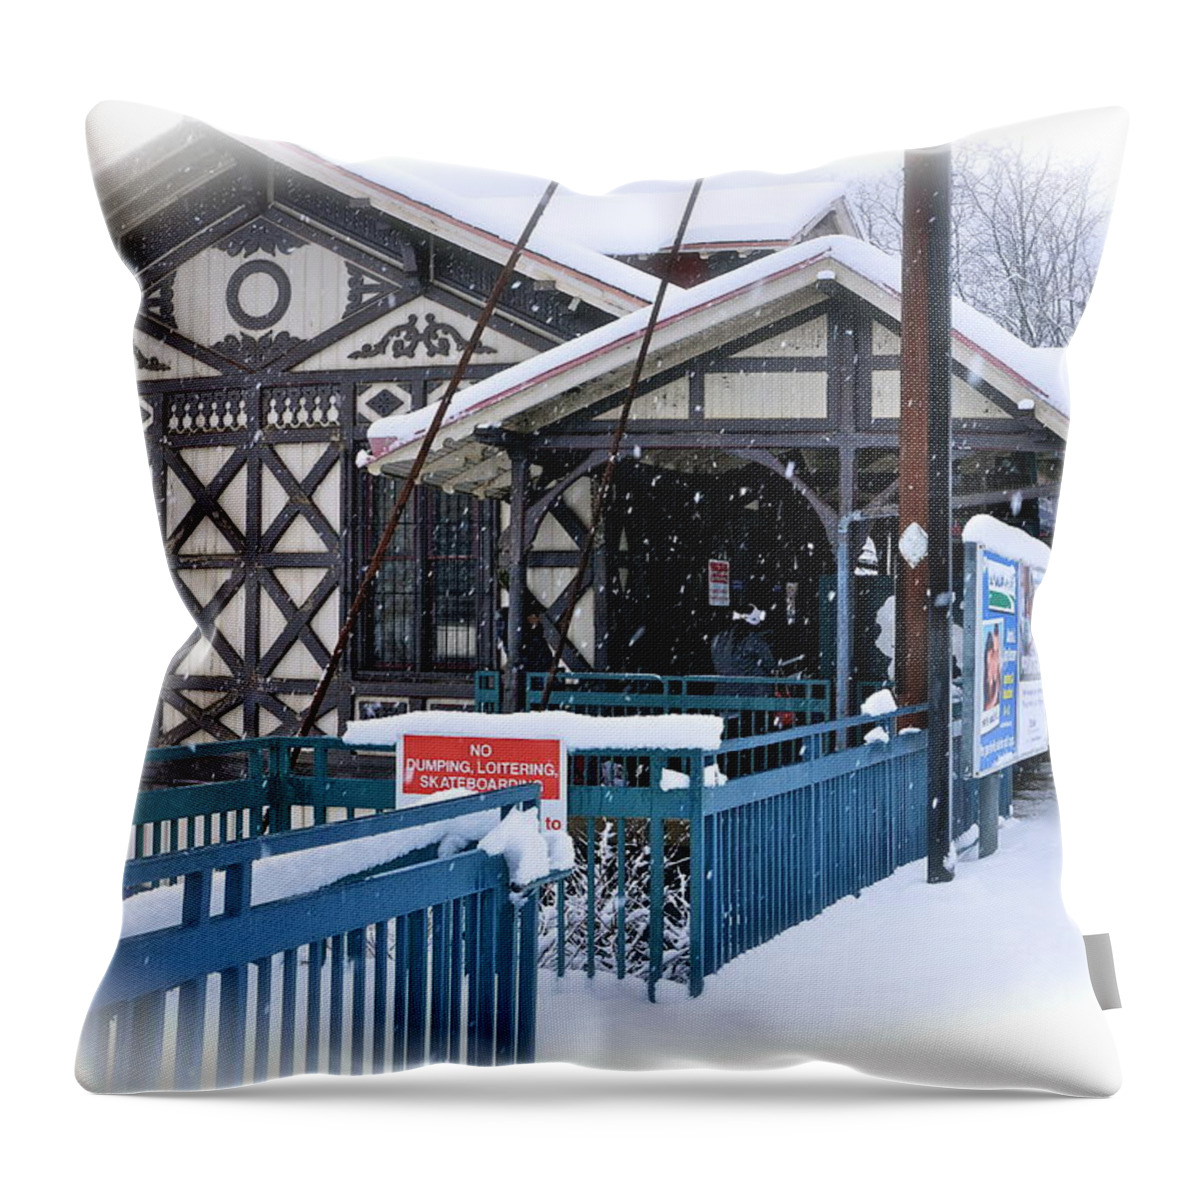 Strafford Station Throw Pillow featuring the photograph Strafford Station by Ira Shander